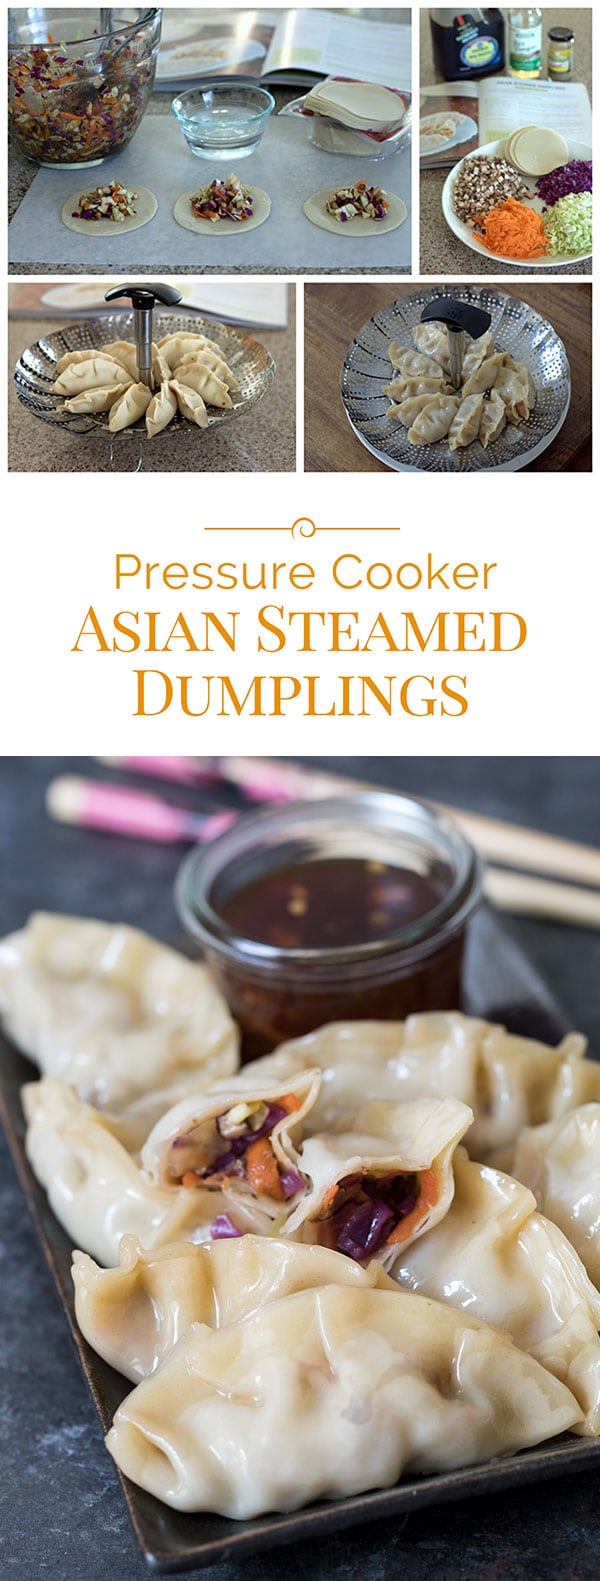 Steamed-Dumplings-Picture-Collage-Pressure-Cooking-Today